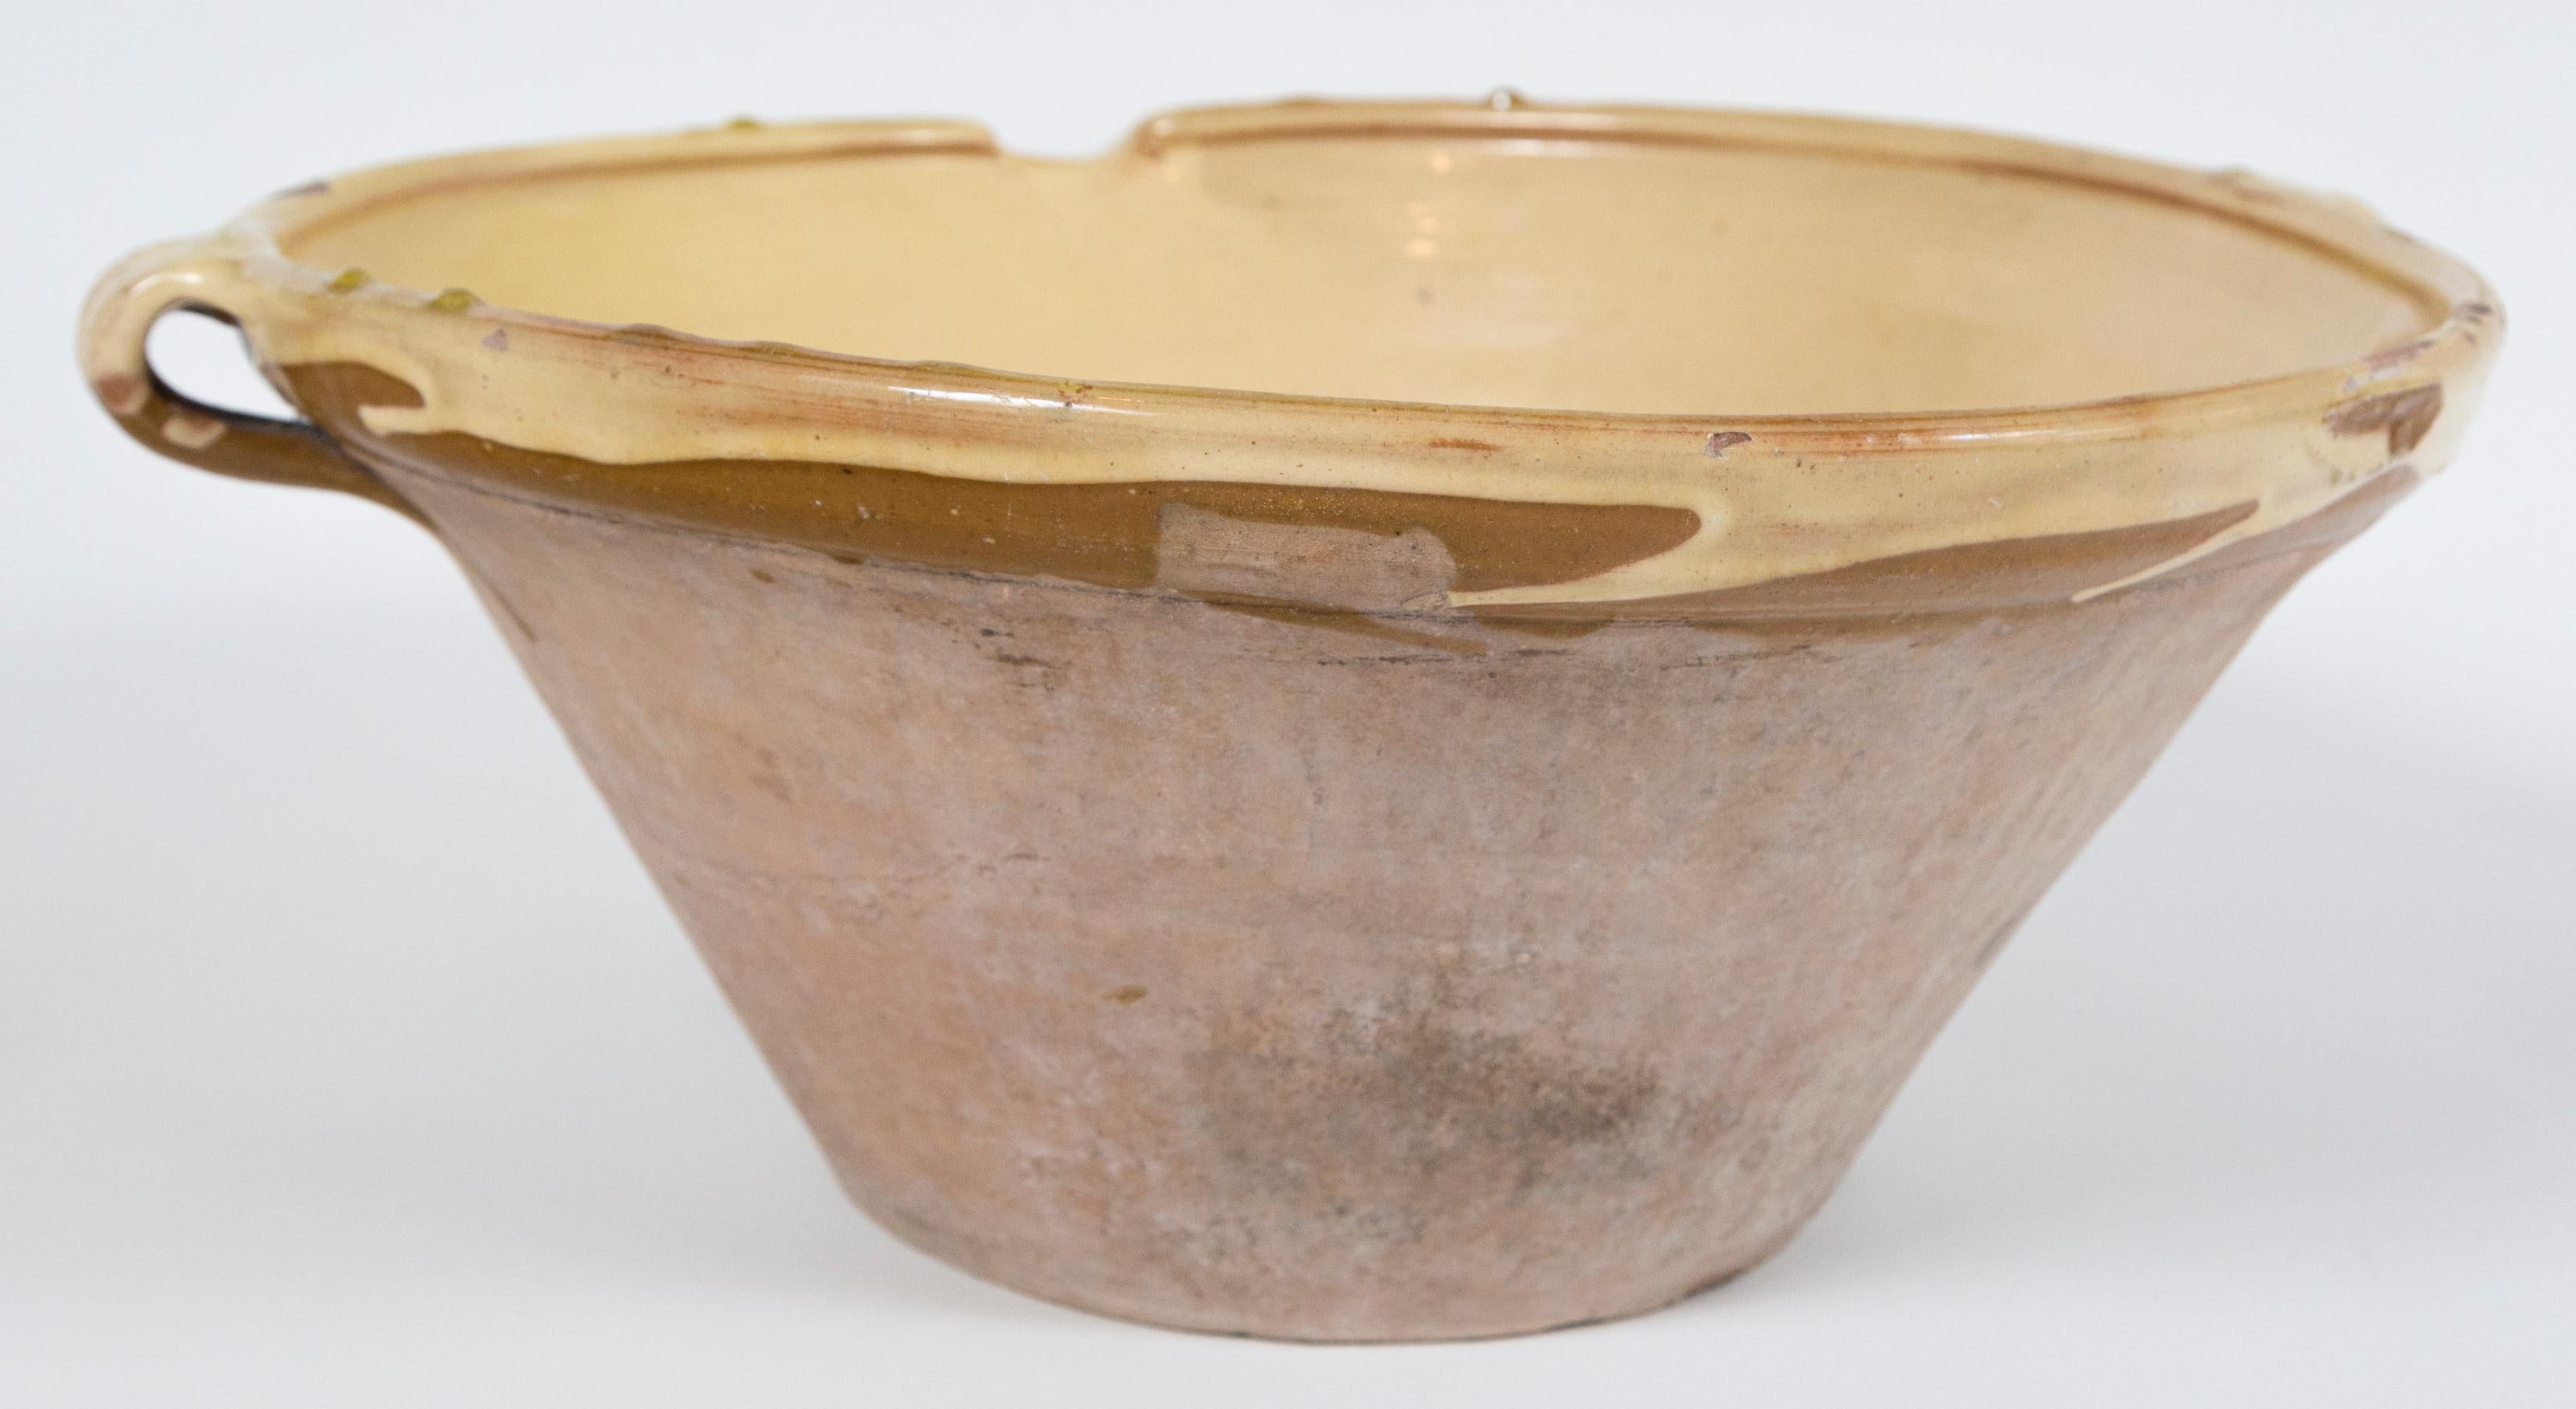 Antique terra cotta 'Tian' bowl, France, late 19th century. A large size 'Tian' with handles and spout. Pale yellow glaze on the interior and rim, unglazed exterior. Originating in the south of France, the 'Tian' was used as a mixing bowl,